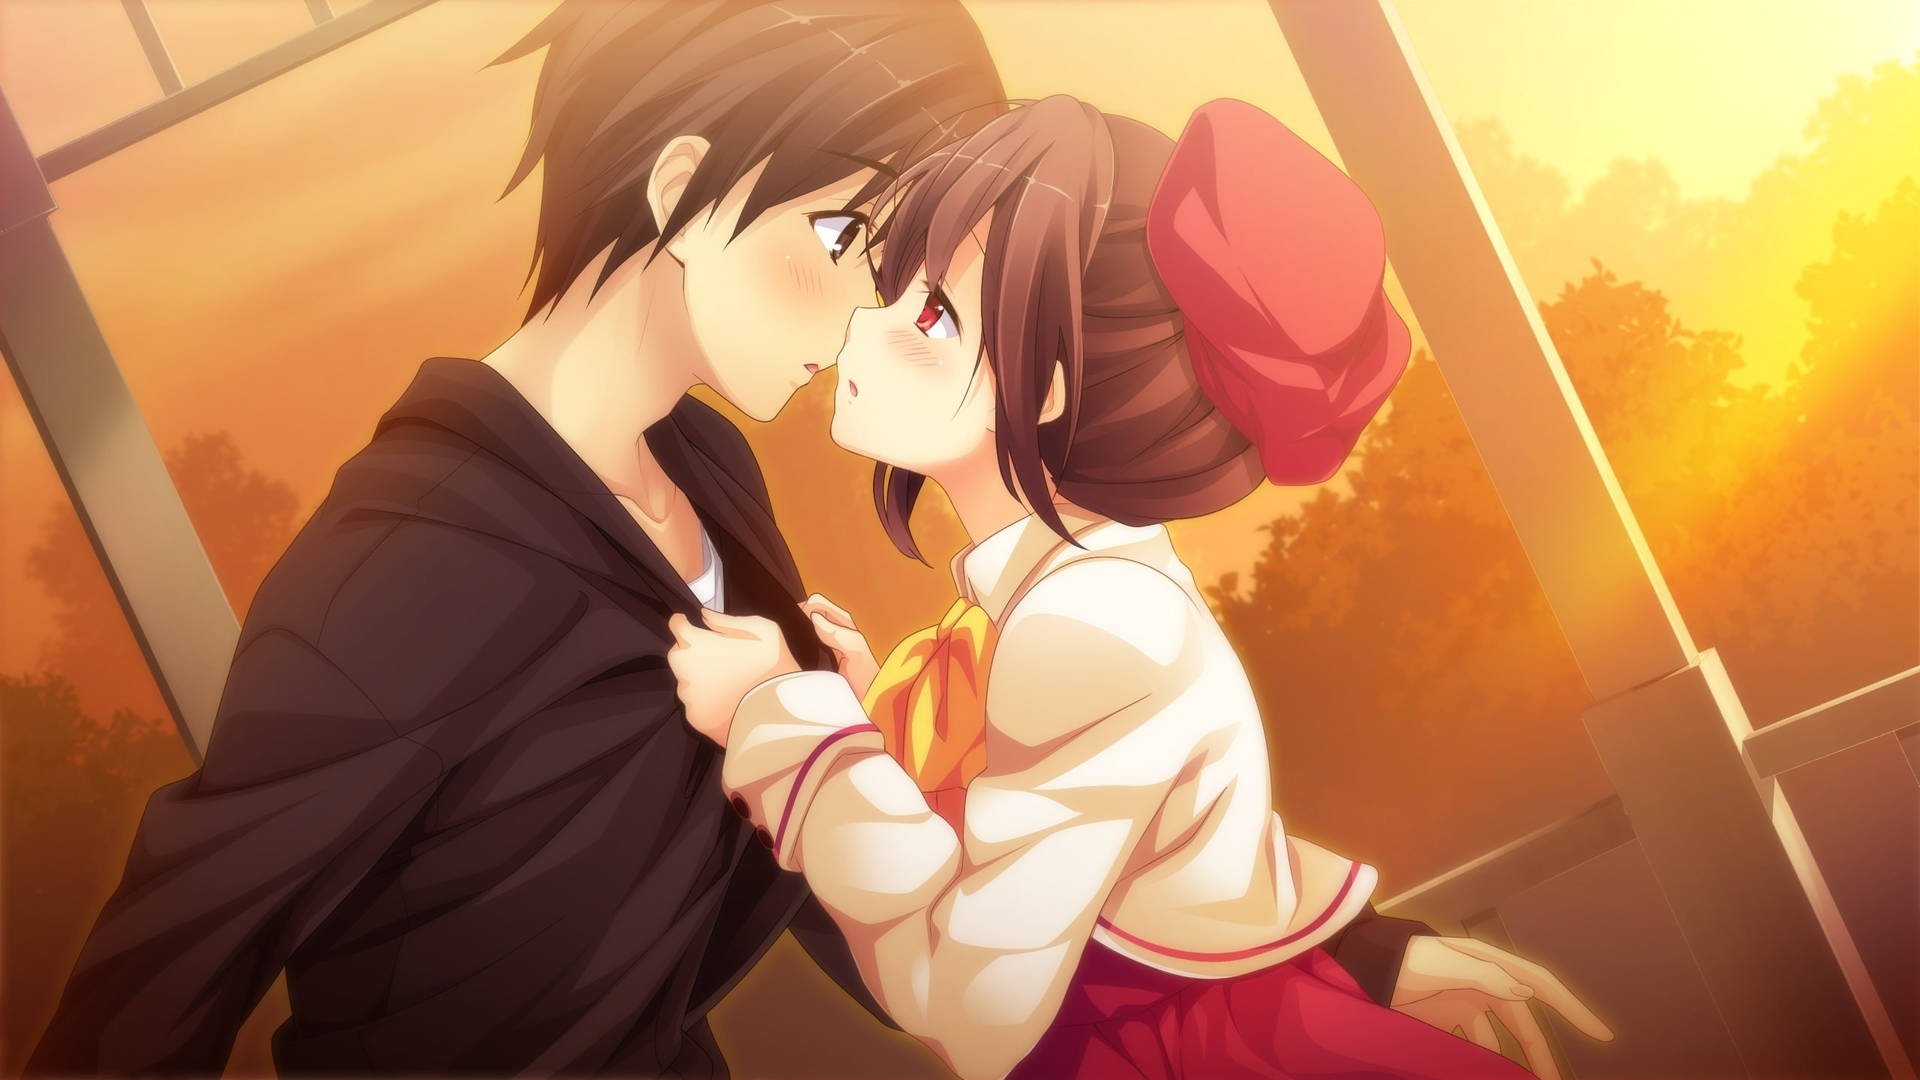 Cute Anime Couple Almost Kiss